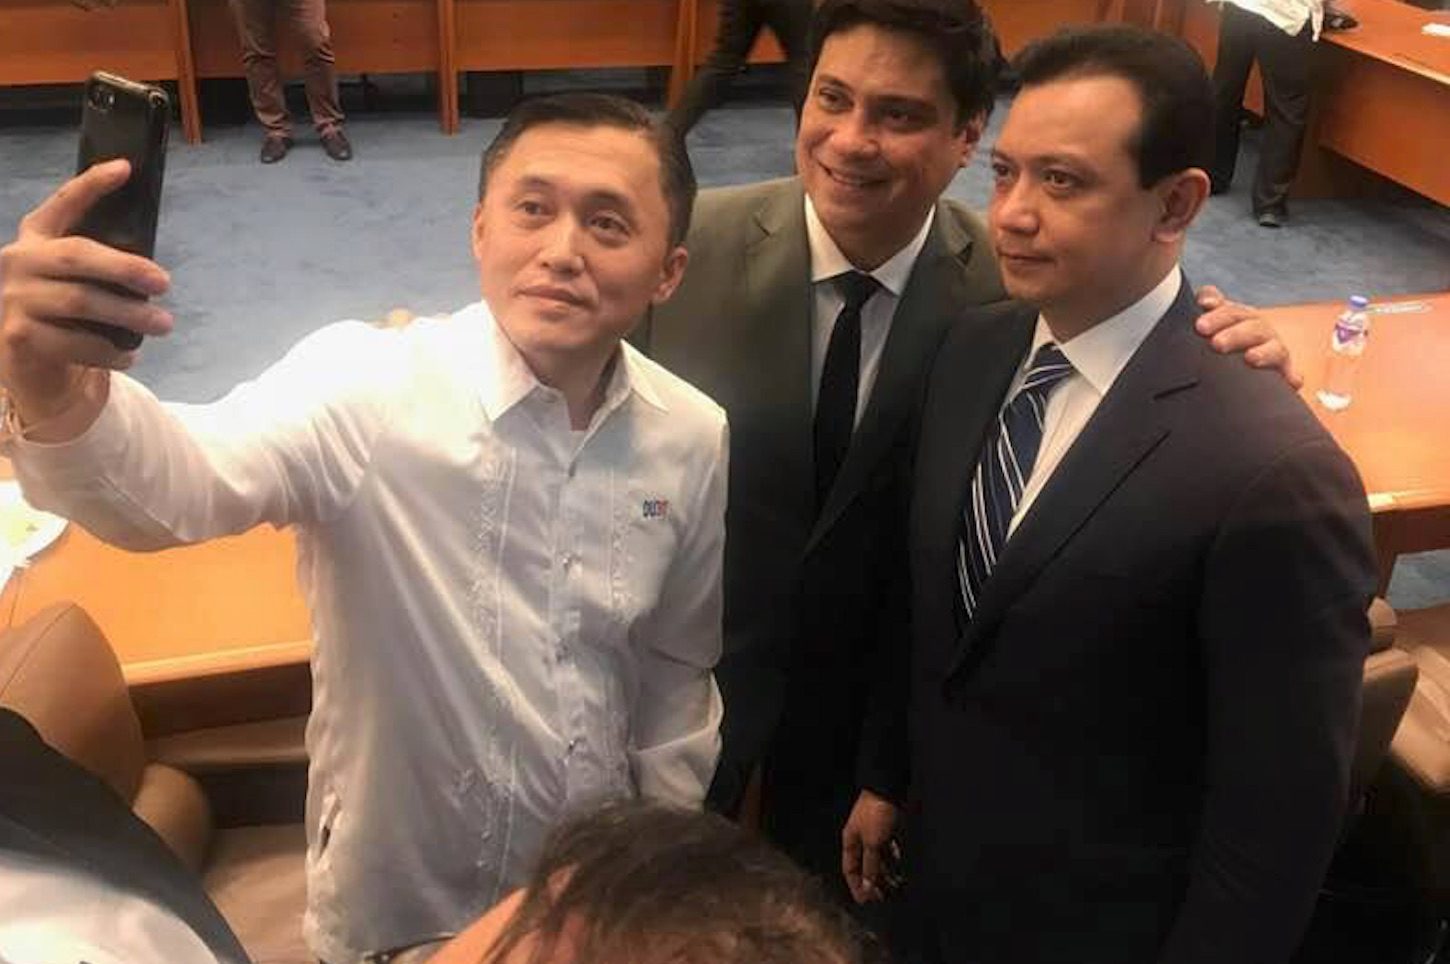 WATCH: Bong Go takes selfie with Trillanes after Senate frigates probe